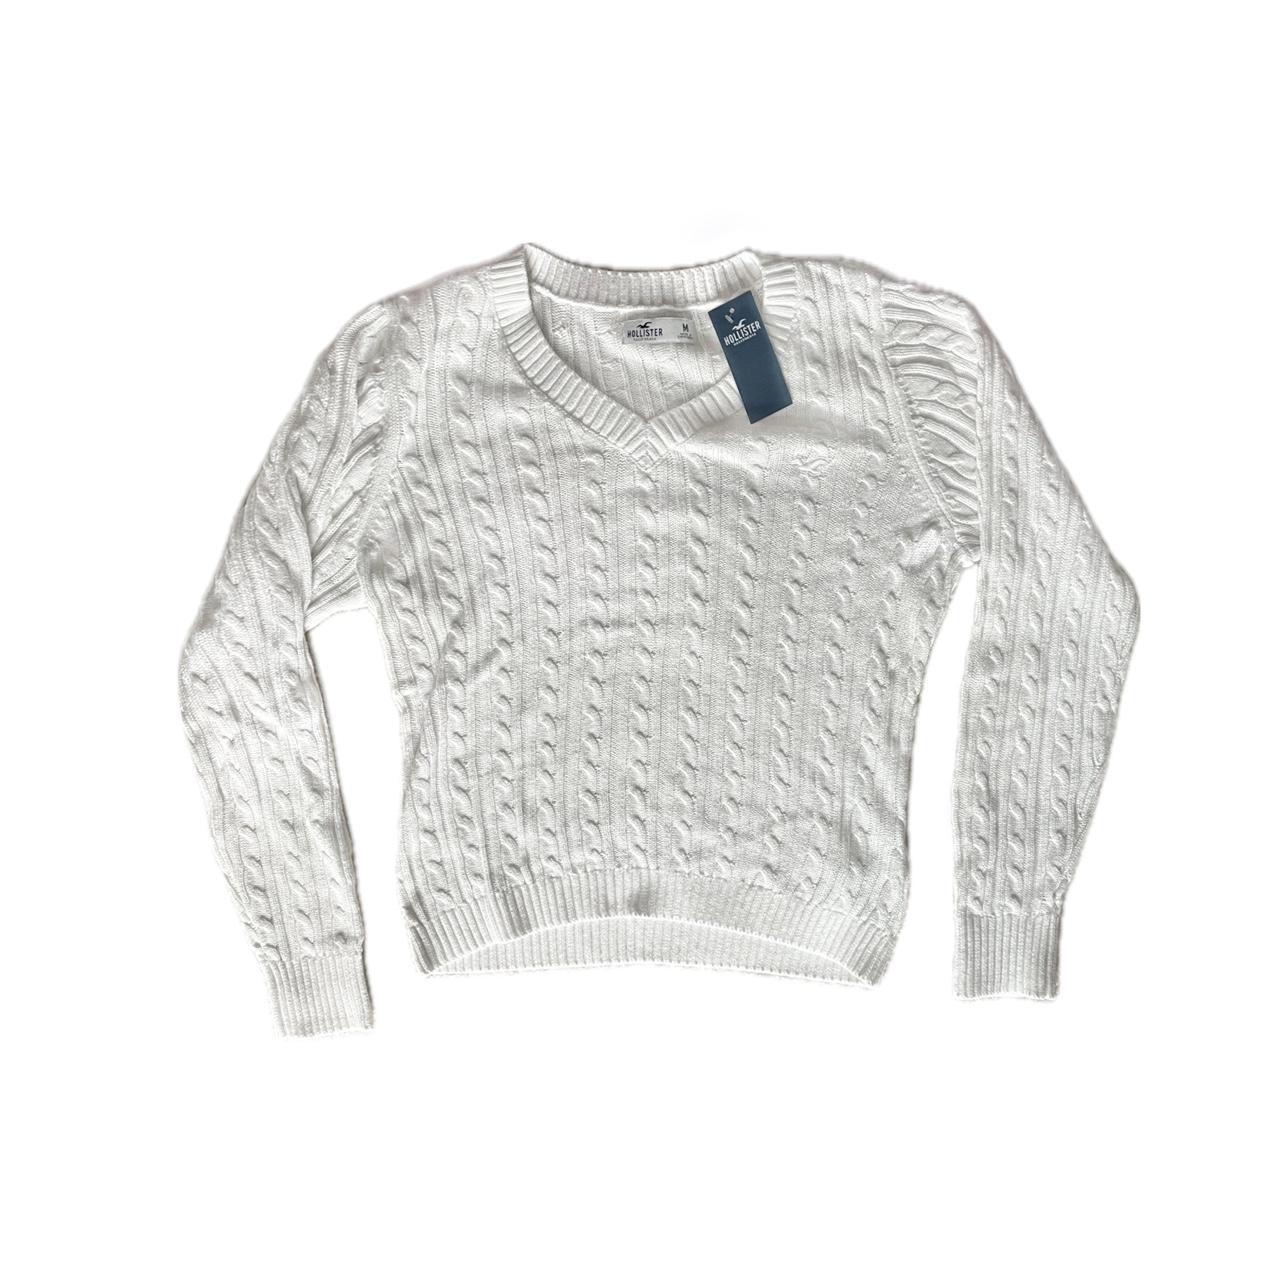 BRAND NEW Cable Knit Sweater , • Size: Medium - fits